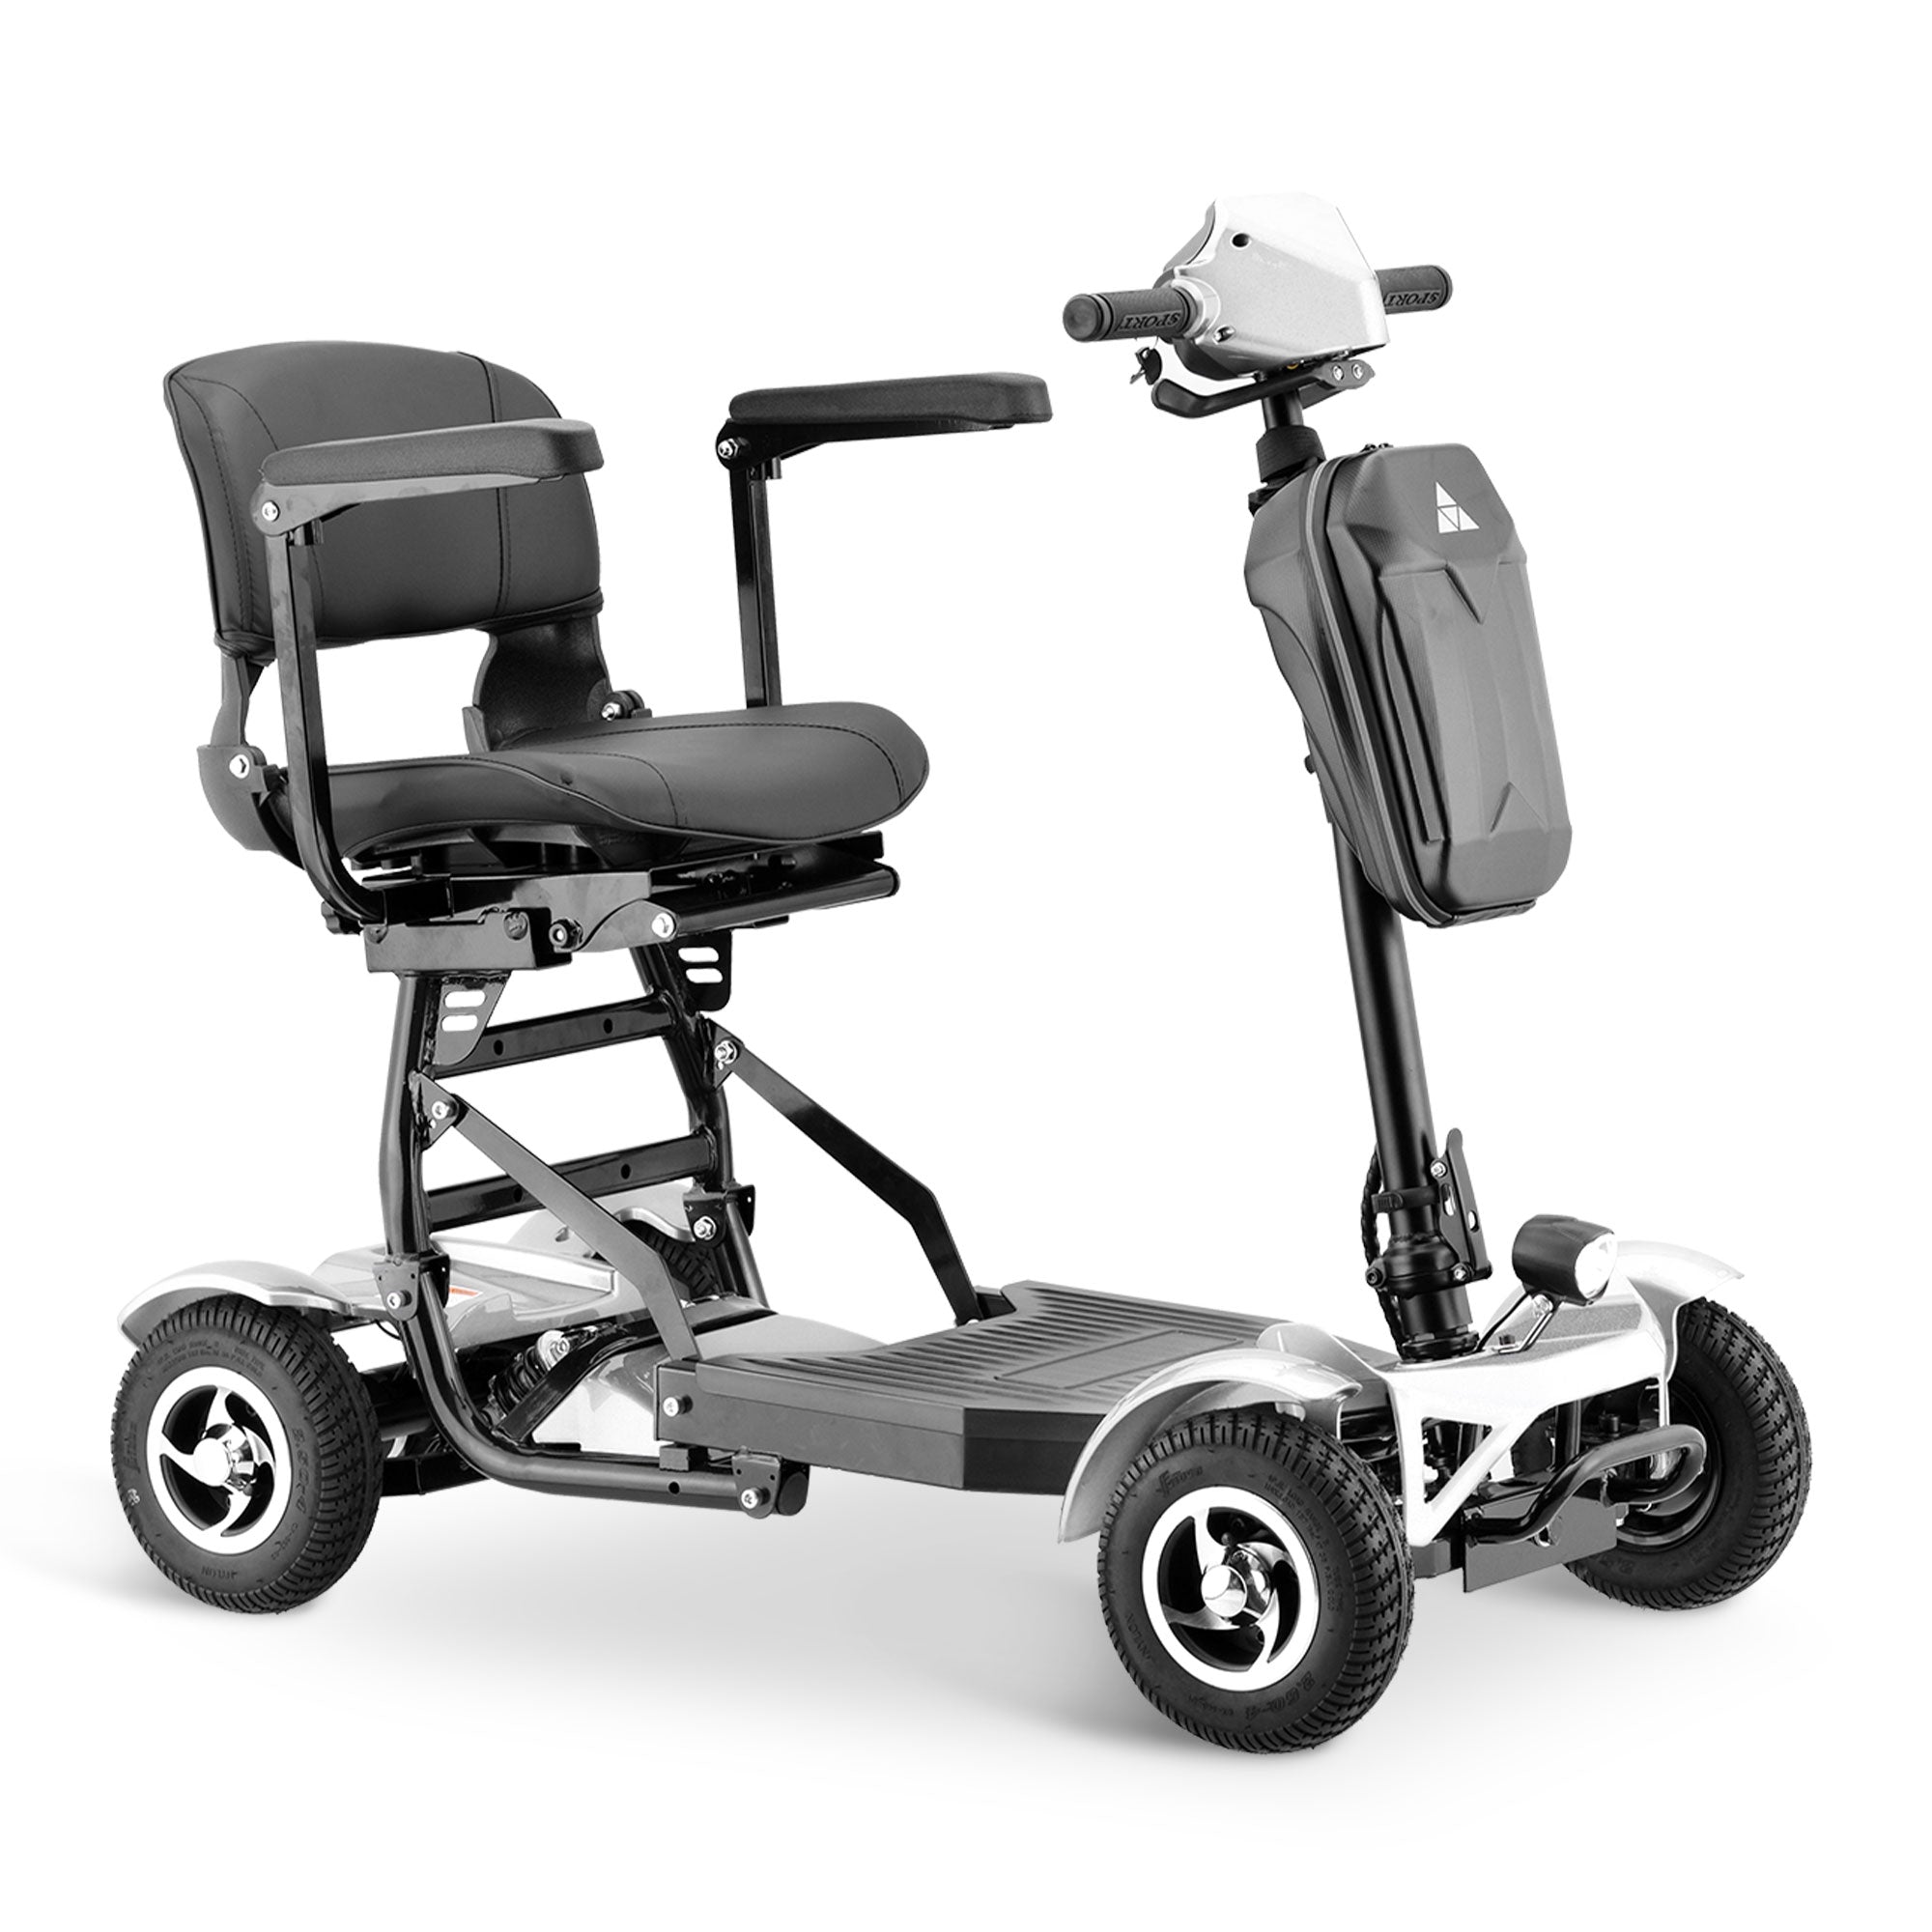 Rubicon FX06 All Terrain Foldable Mobility Scooters - Electricwheelchair.Store